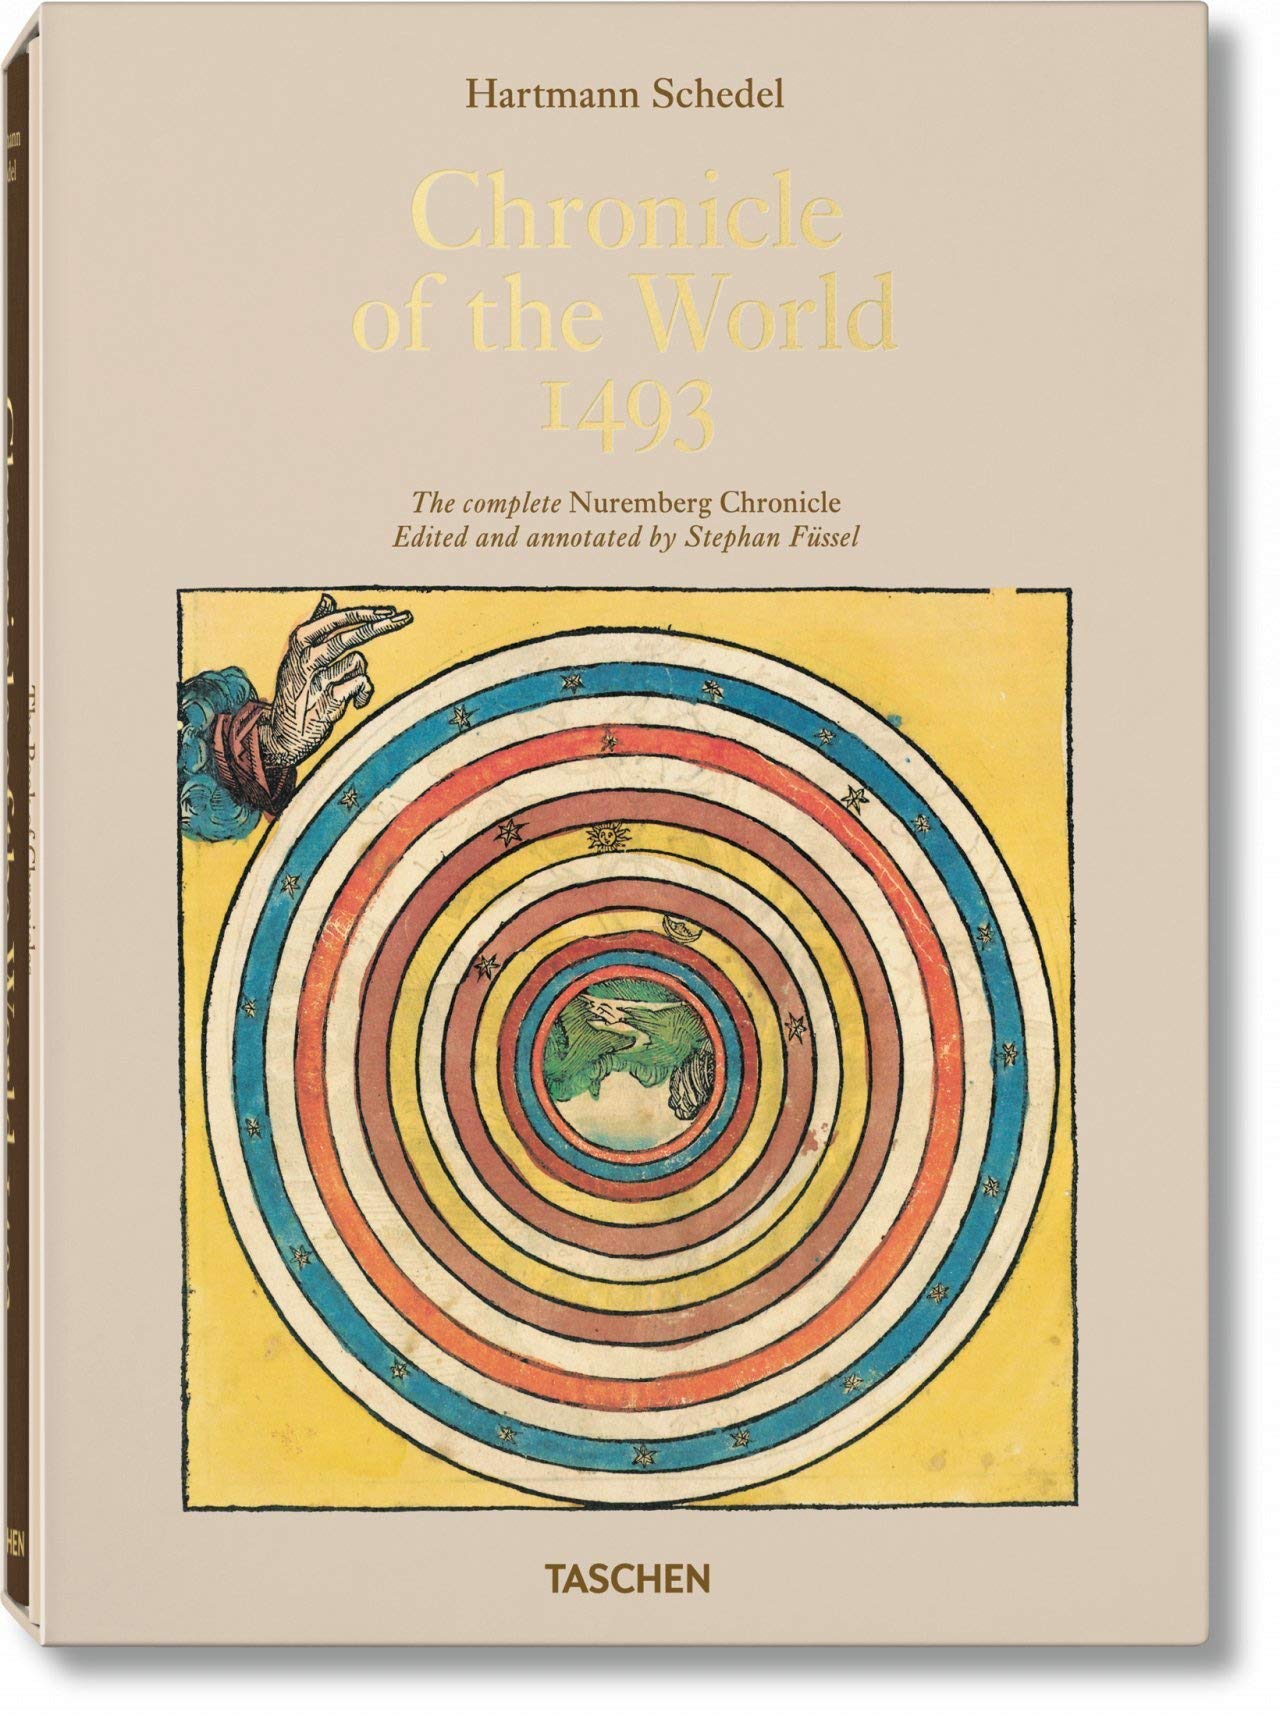 Hartmann Schedel: Chronicle of the World - 1493 | Stephan Fussel